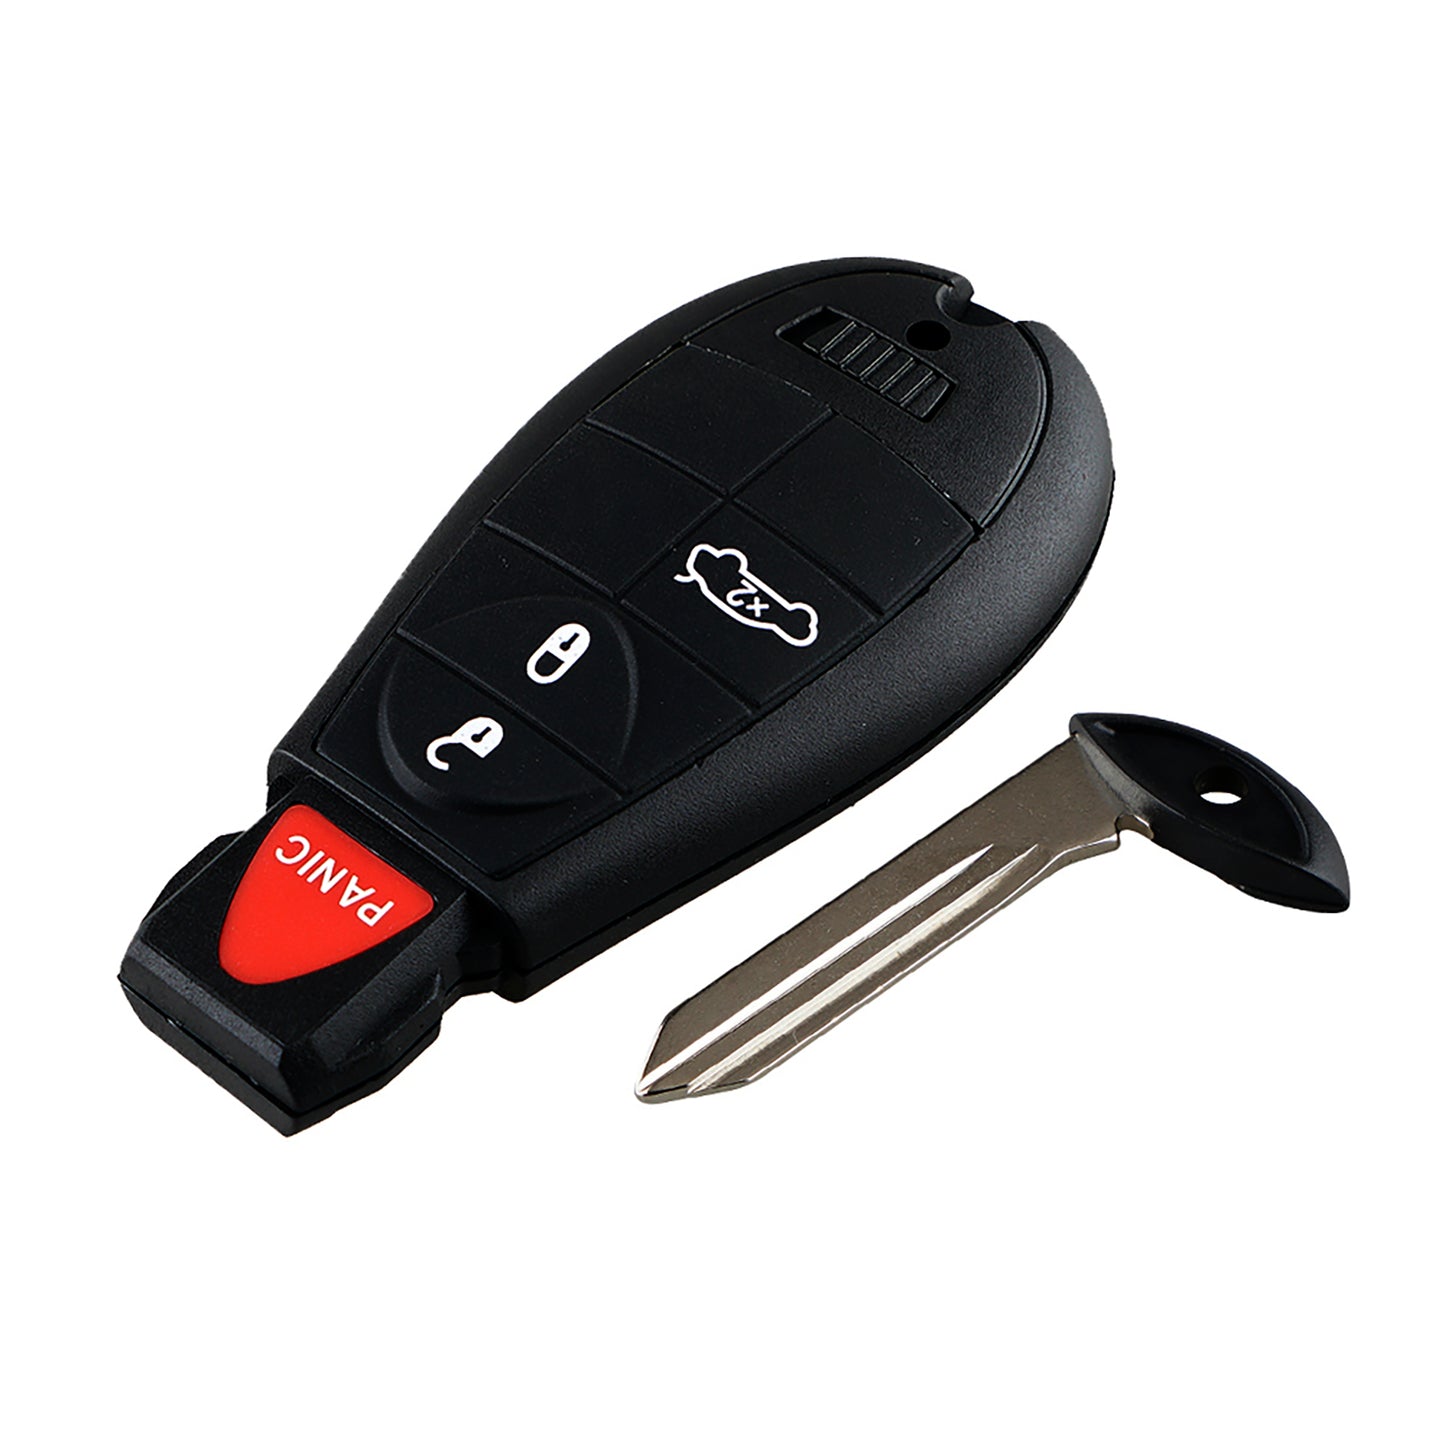 4 Buttons 433MHz Keyless Entry Fob Remote Car Key For 2008-2013 Dodge Charger 2008-2013 Jeep Grand Cherokee 2008-2011 Chrysler 300 2008-2014 Dodge Magnum Challenger FCC ID: M3N5WY783X IYZ-C01CSKU : J027